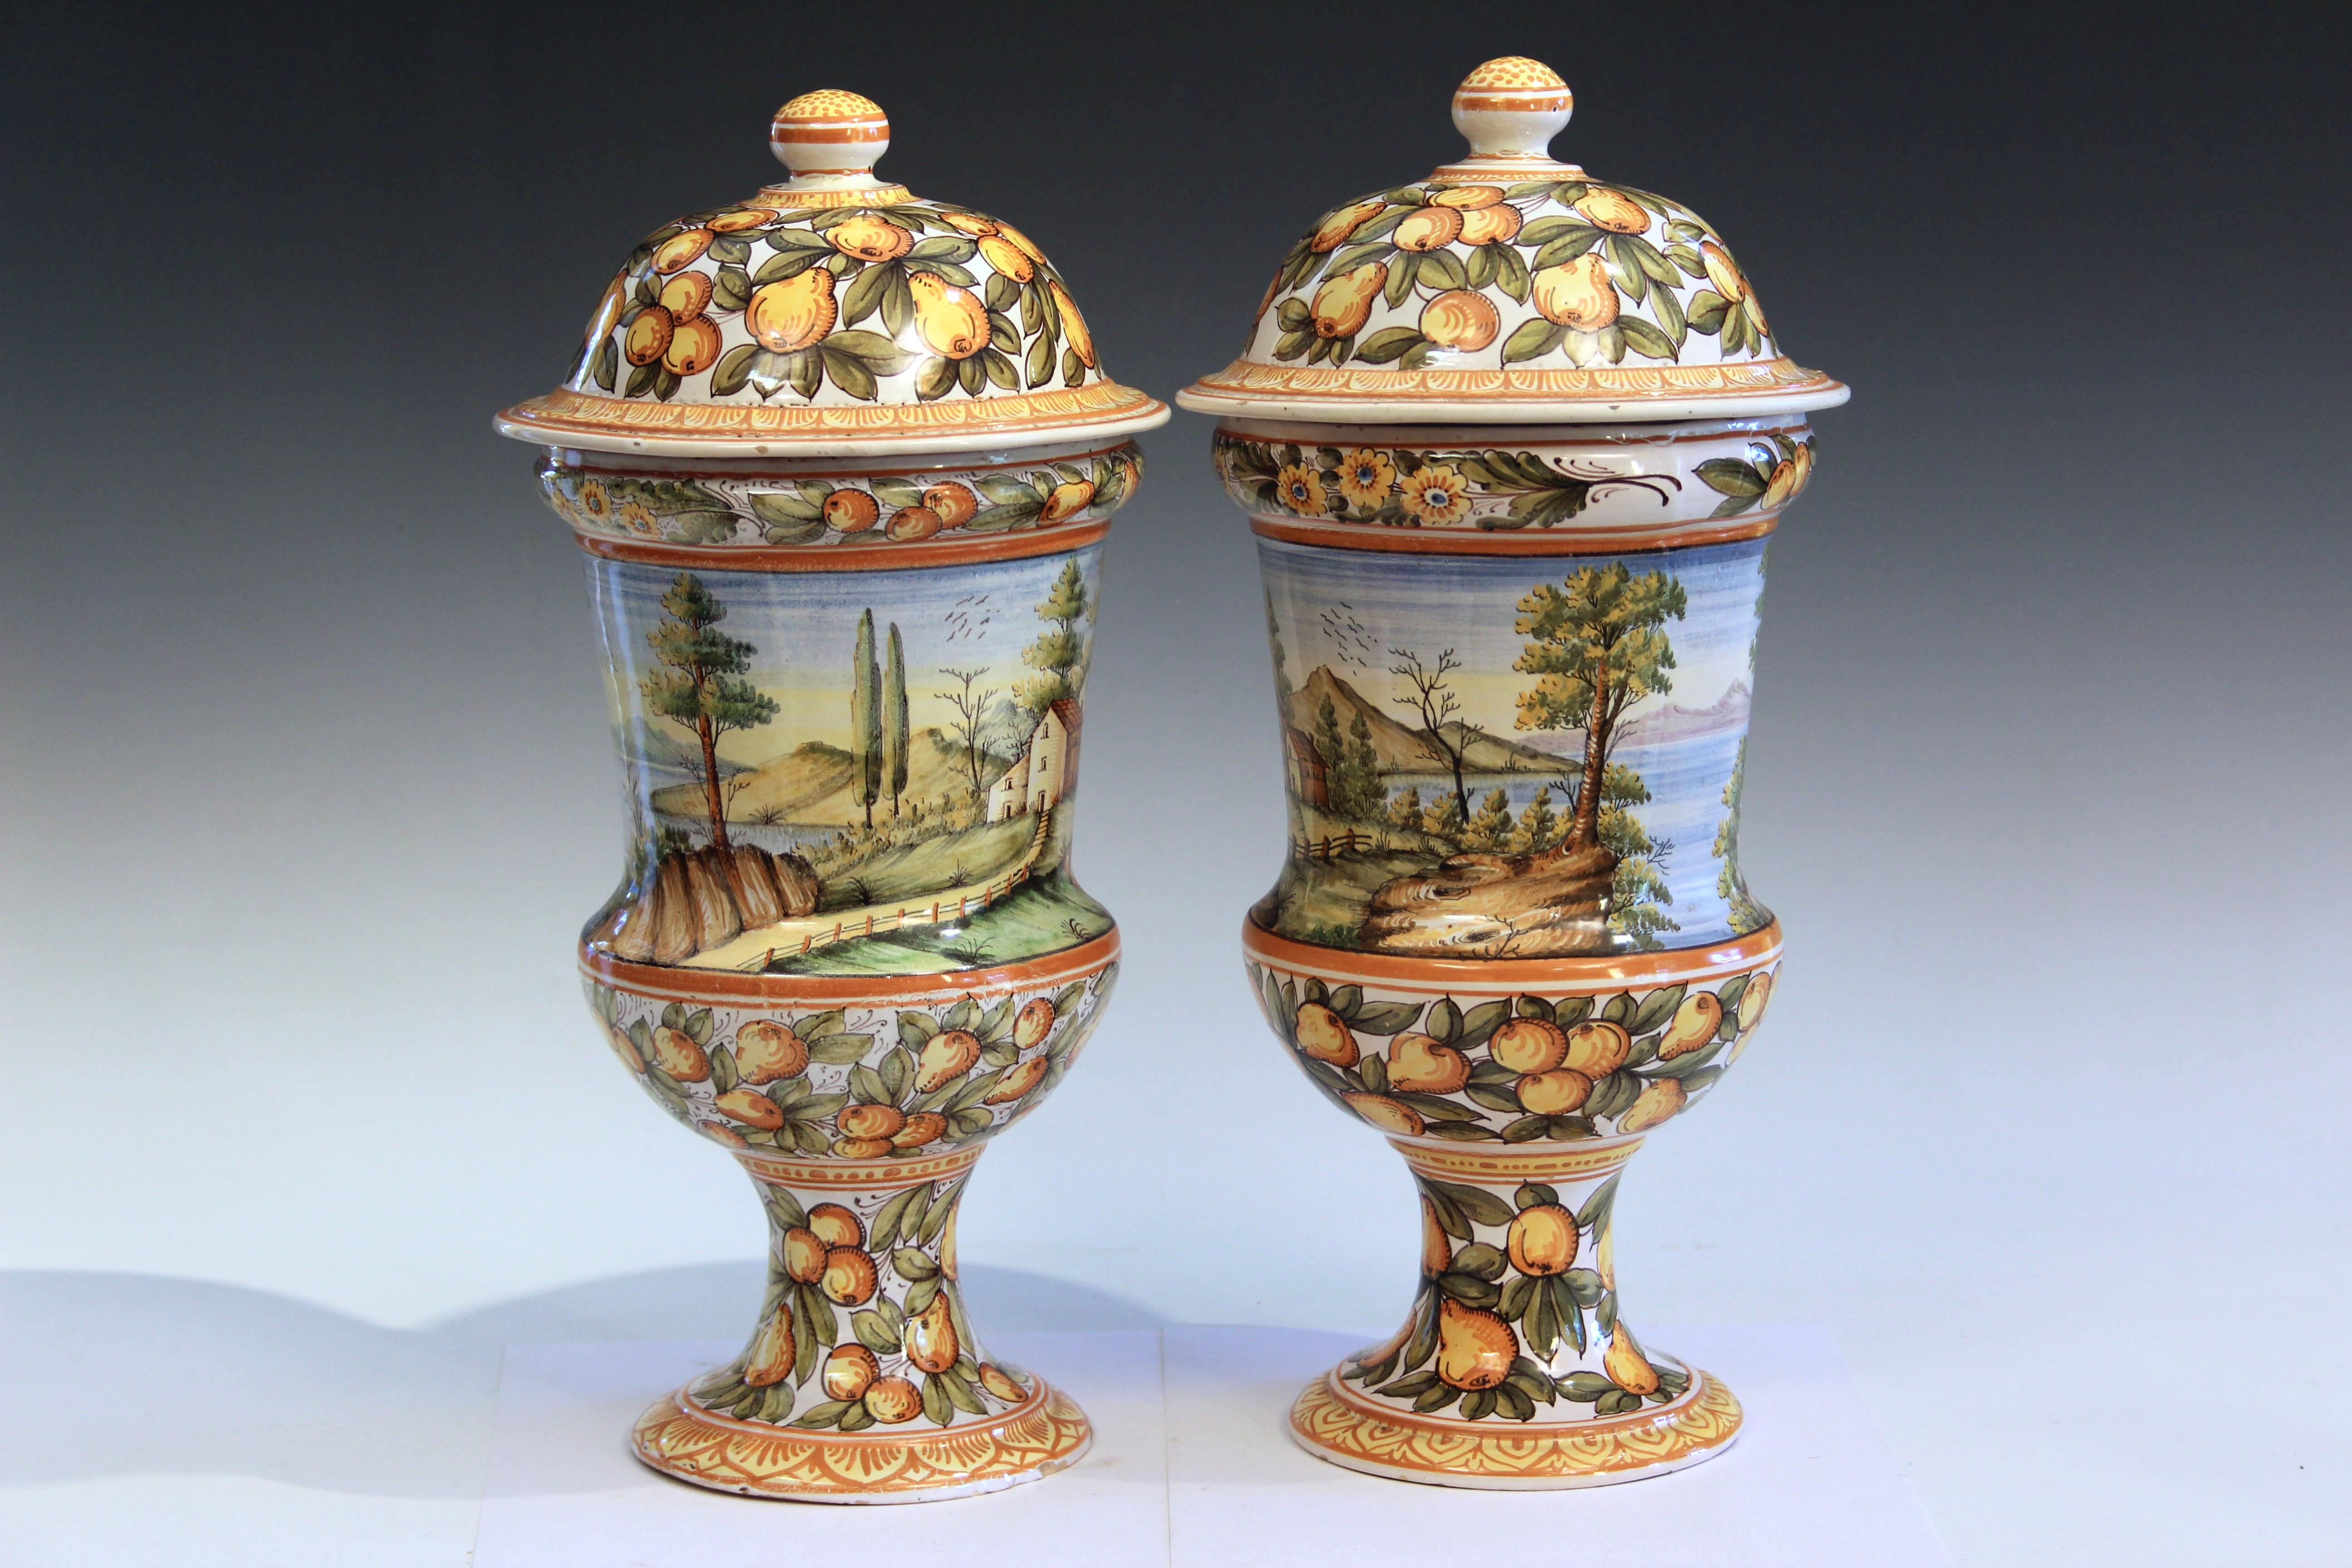 Old pair Deruta majolica pottery covered urn jars, circa early/mid 20th century. Hand painted all around with country landscape scenes of lakes and mountains. 16 1/2